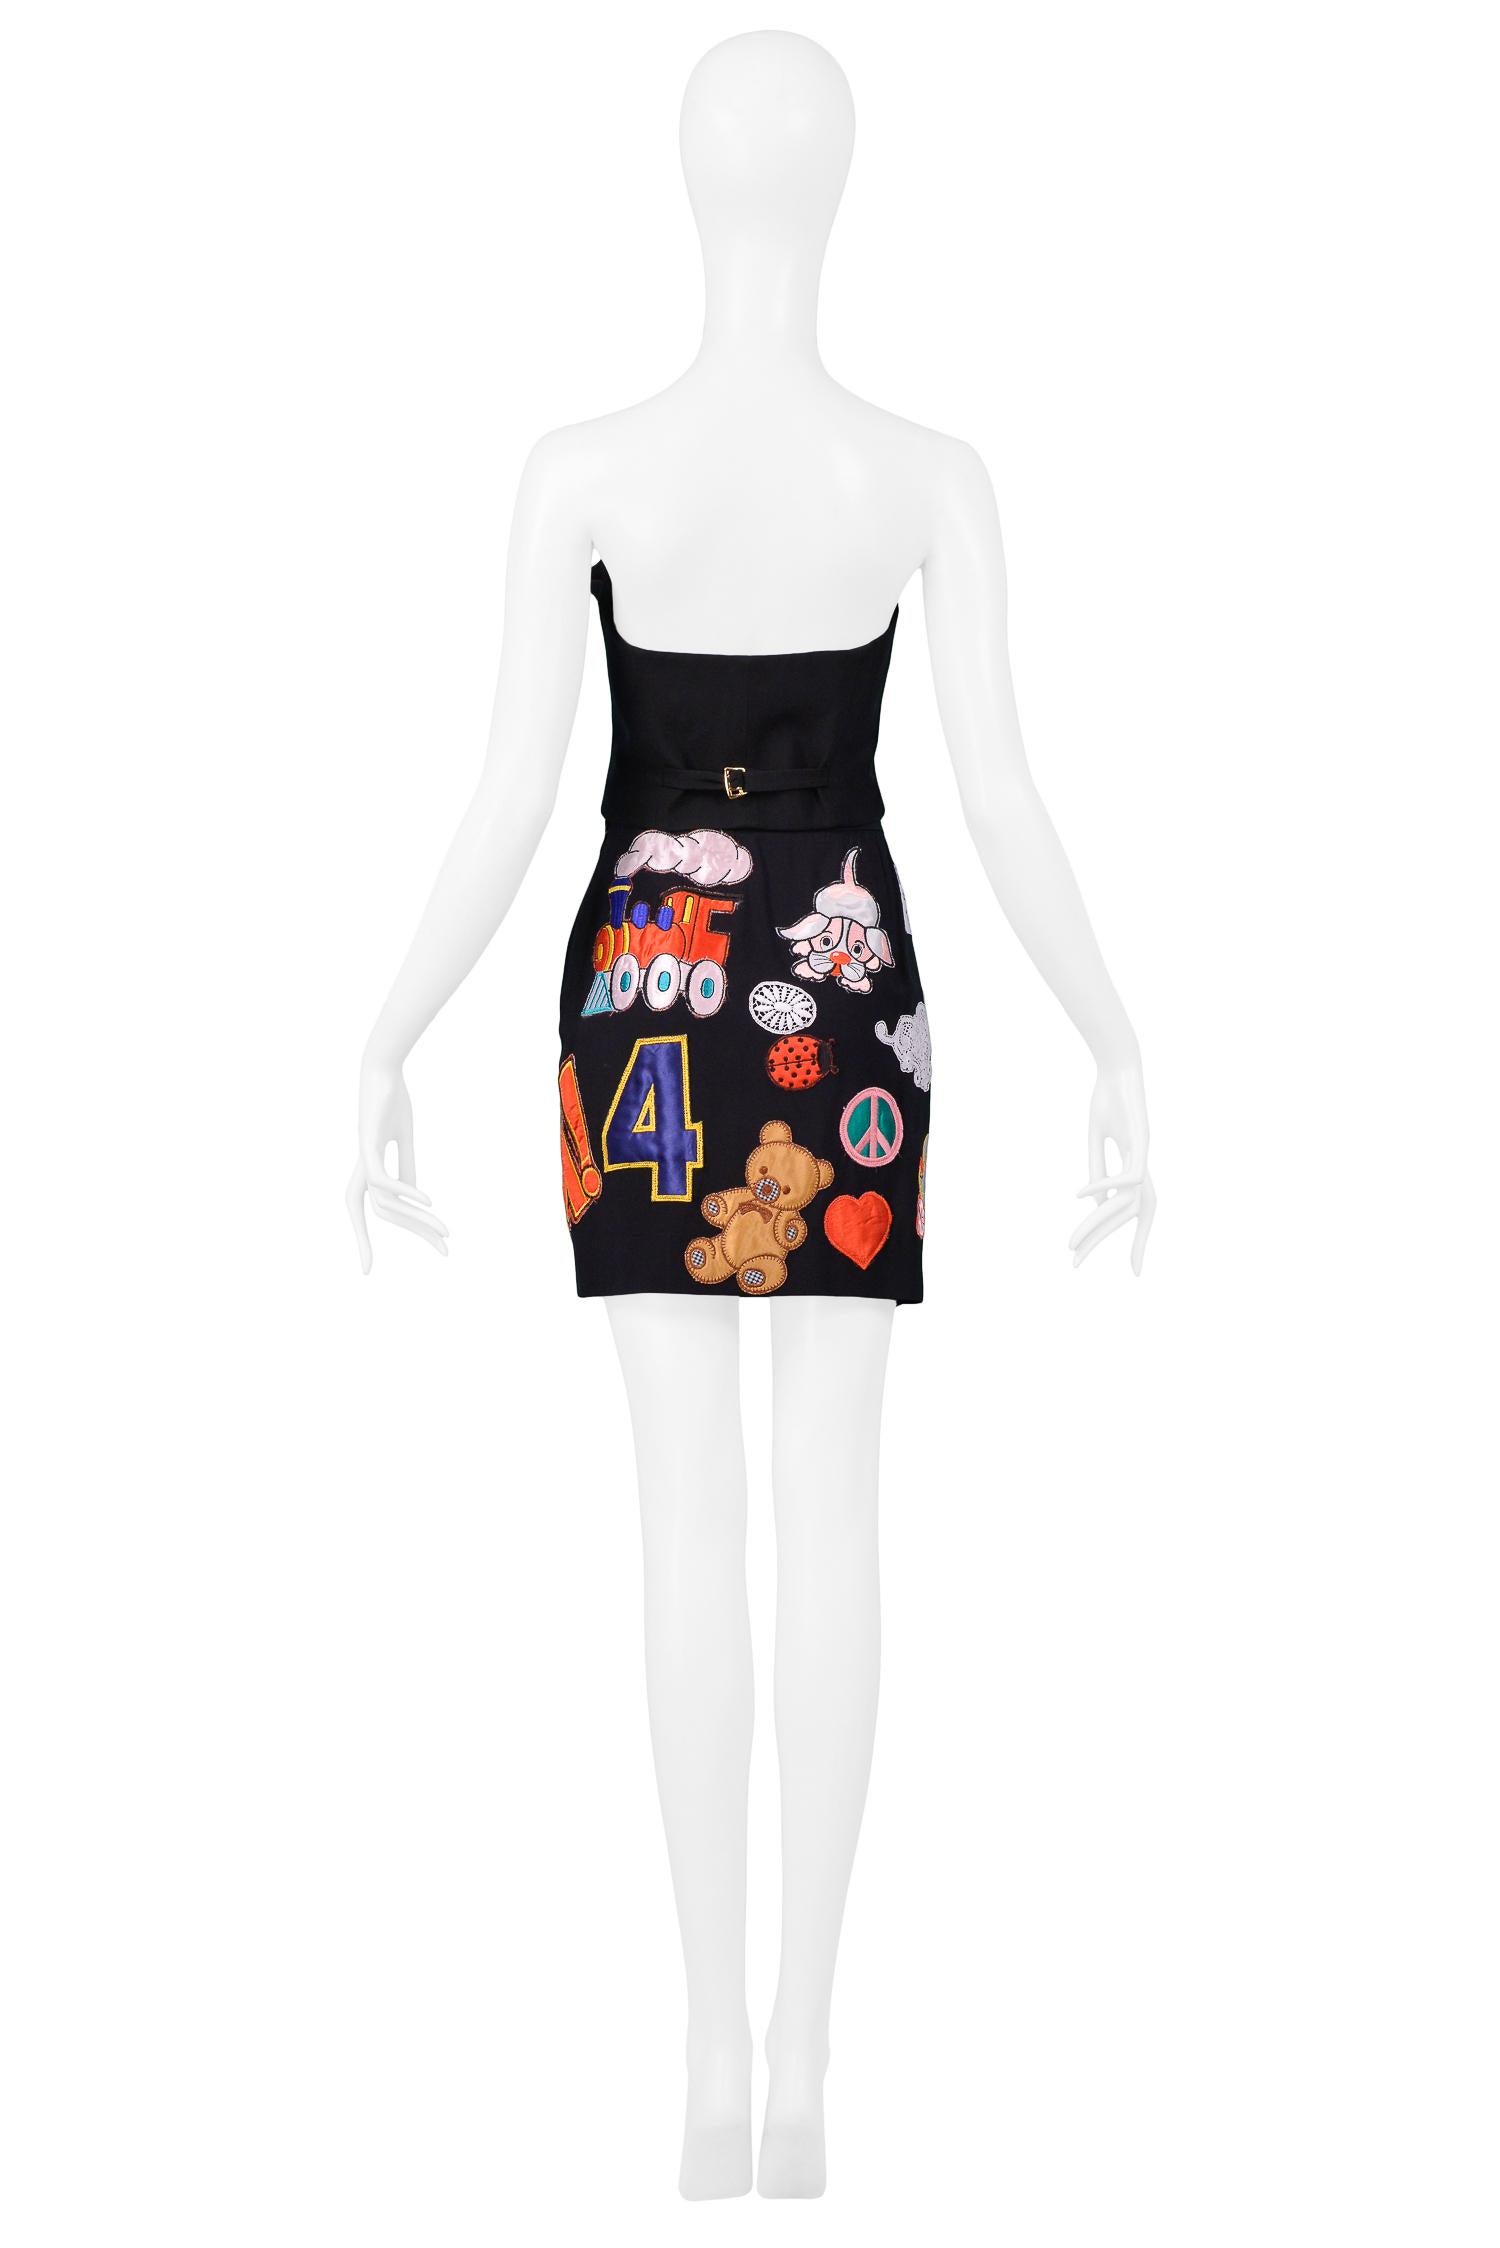 Vintage Moschino Couture 1993/94 Bustier & Skirt Ensemble In Good Condition For Sale In Los Angeles, CA